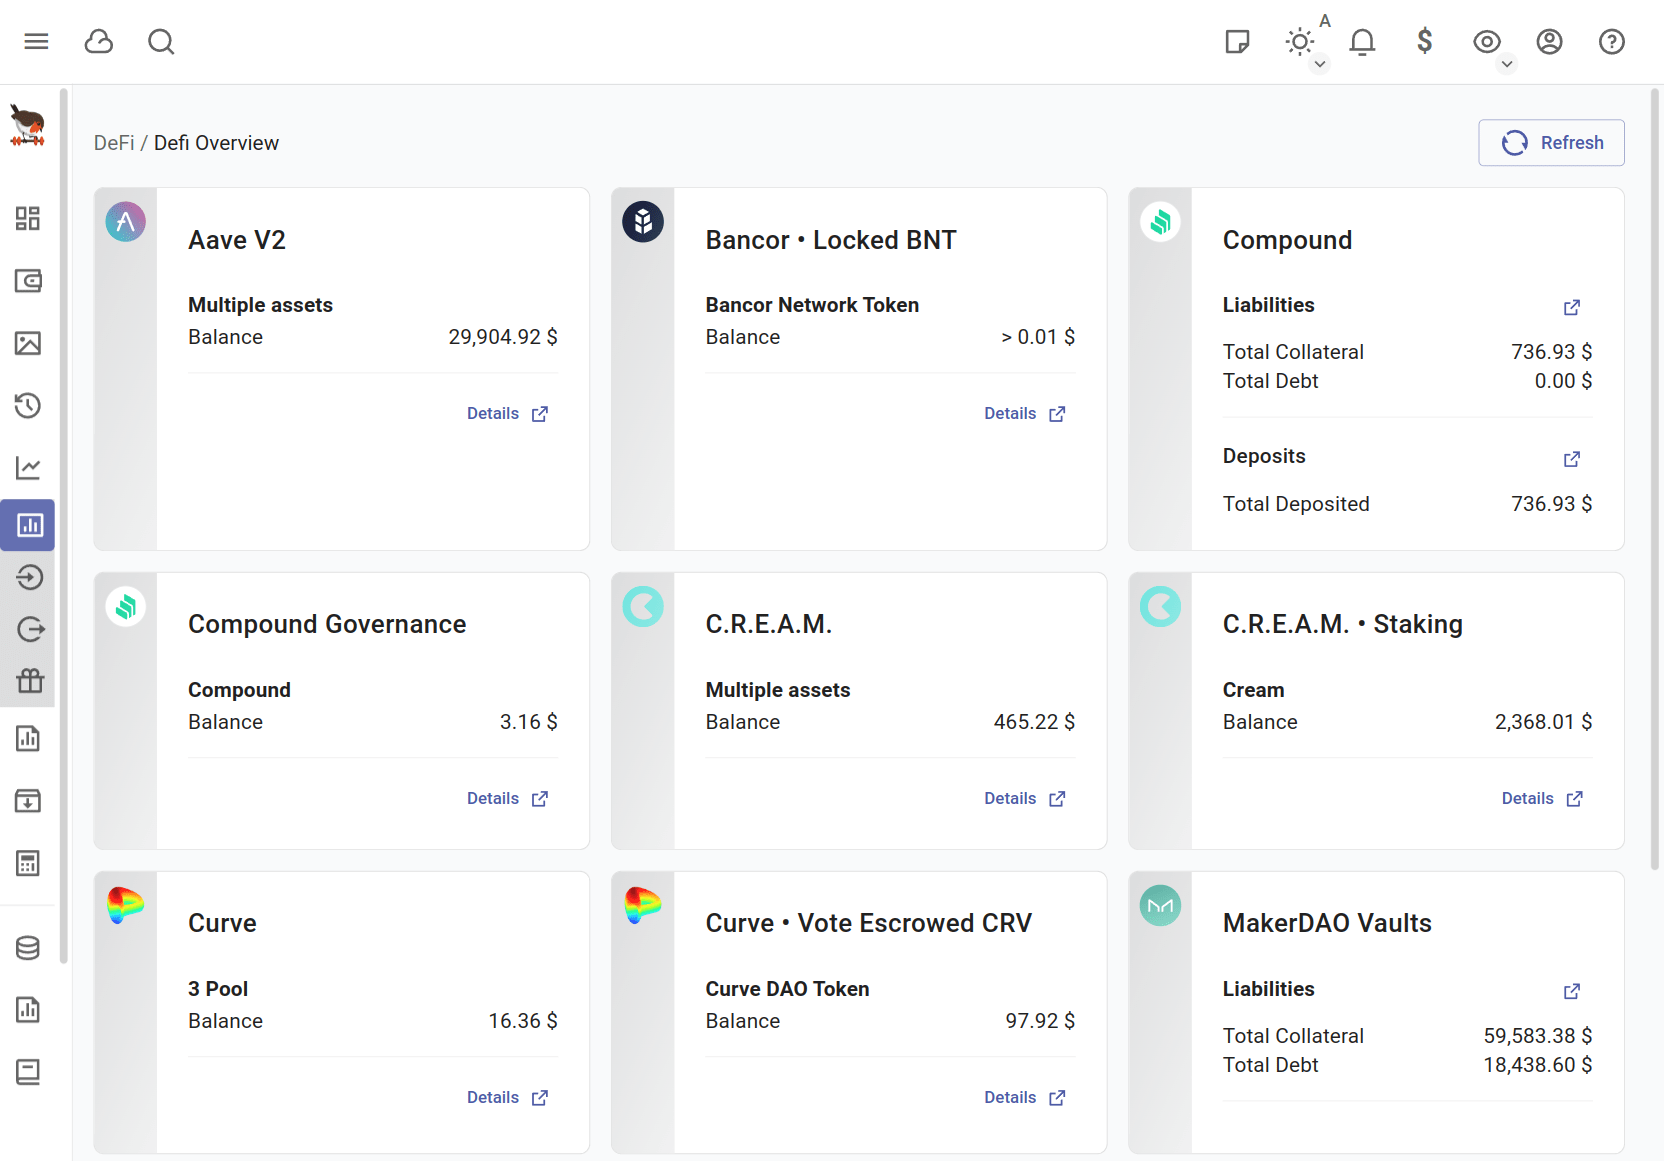 Defi Overview